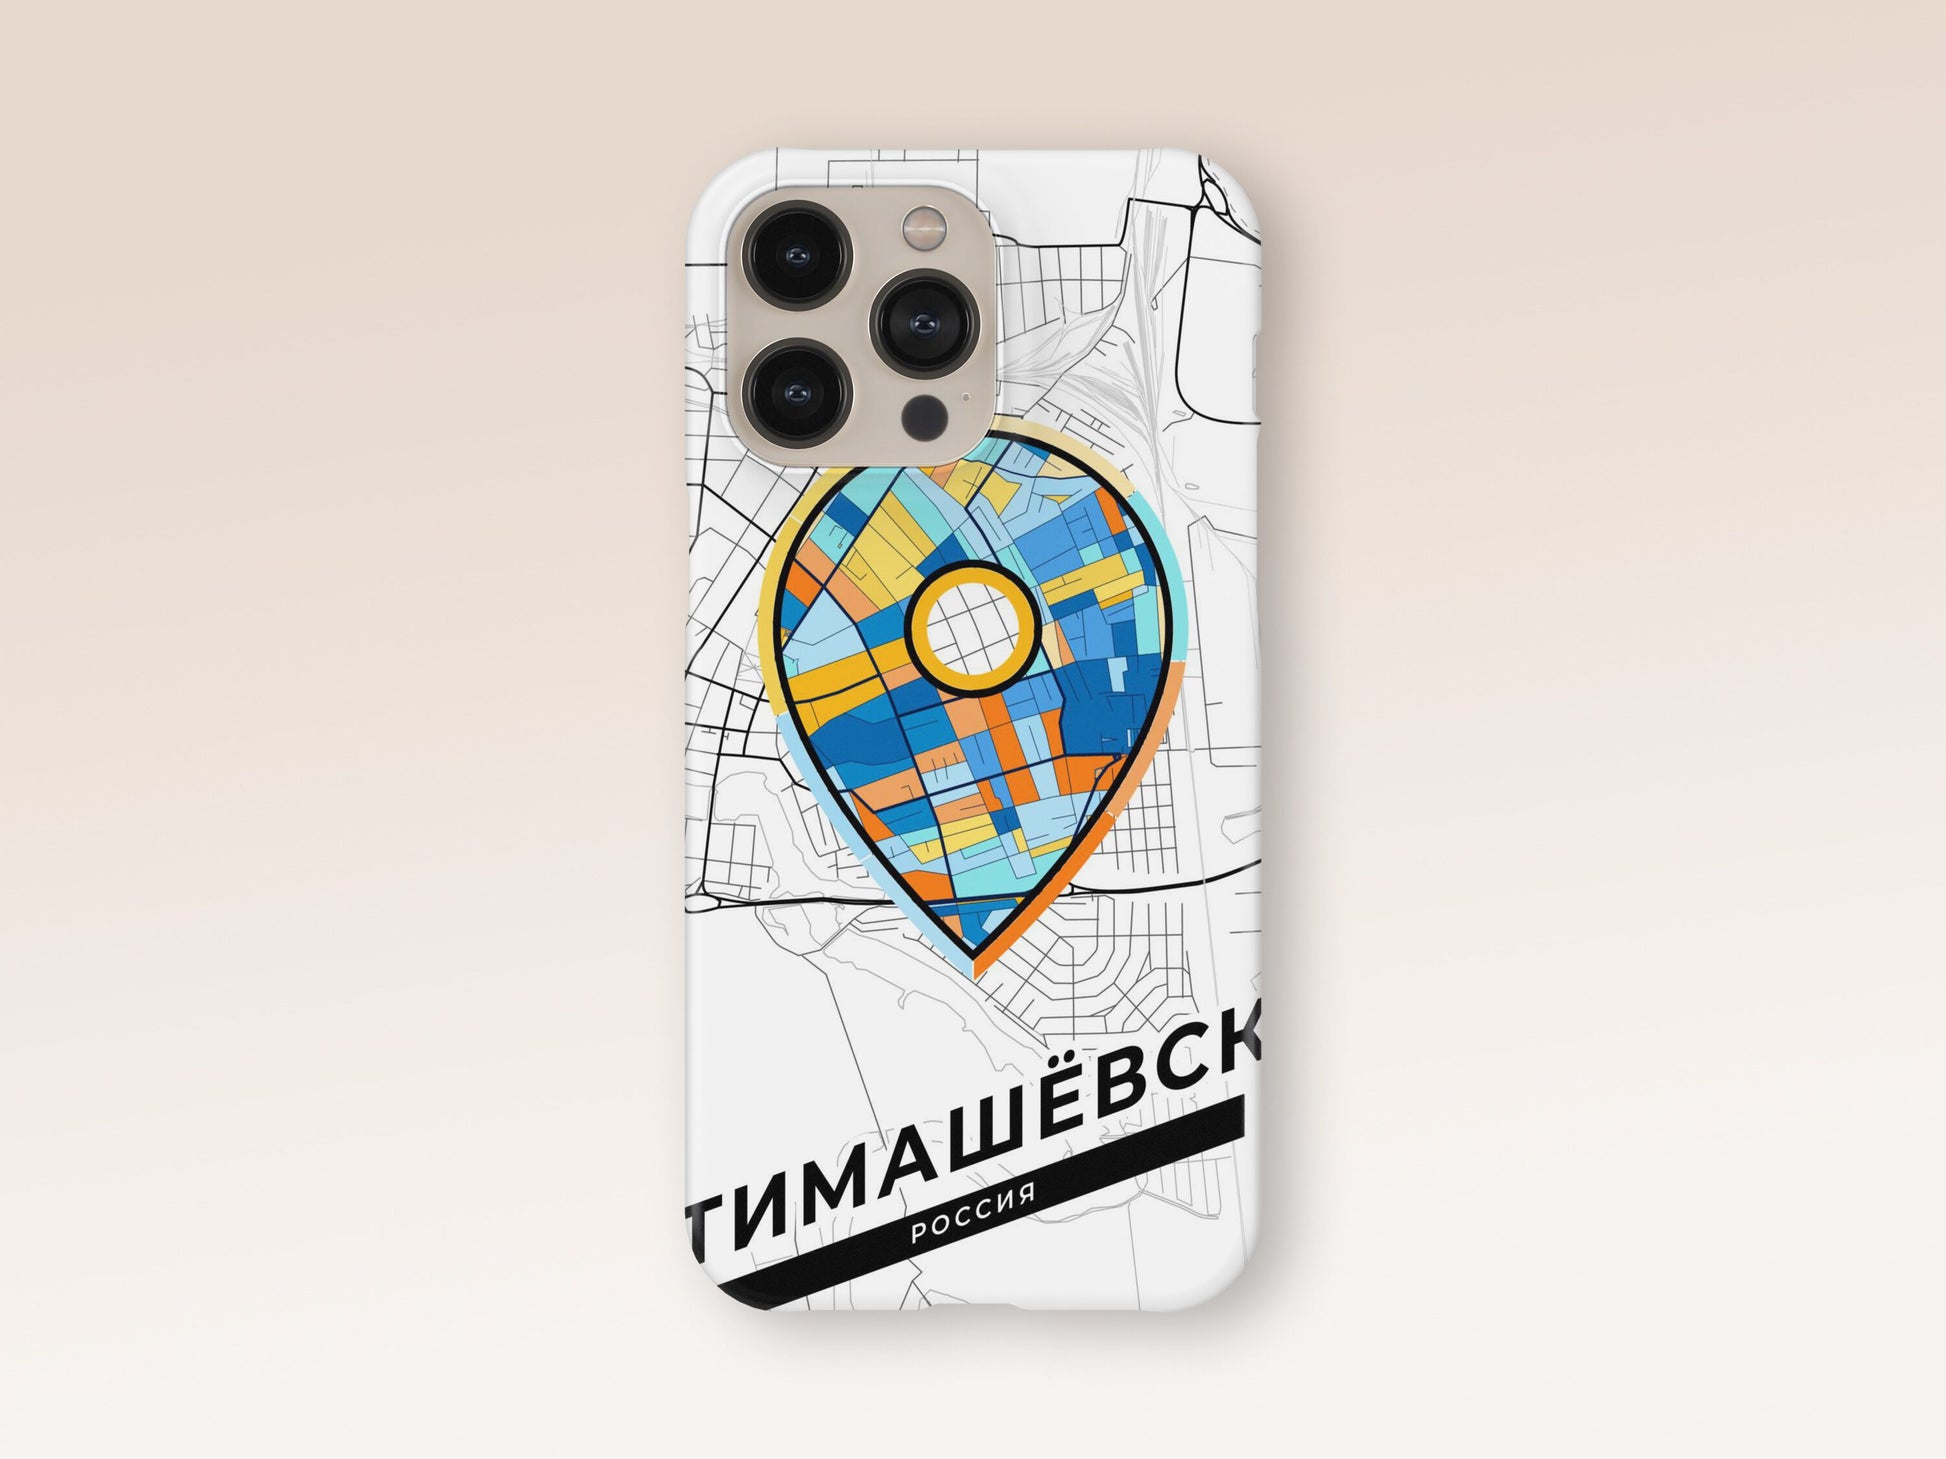 Timashyovsk Russia slim phone case with colorful icon 1